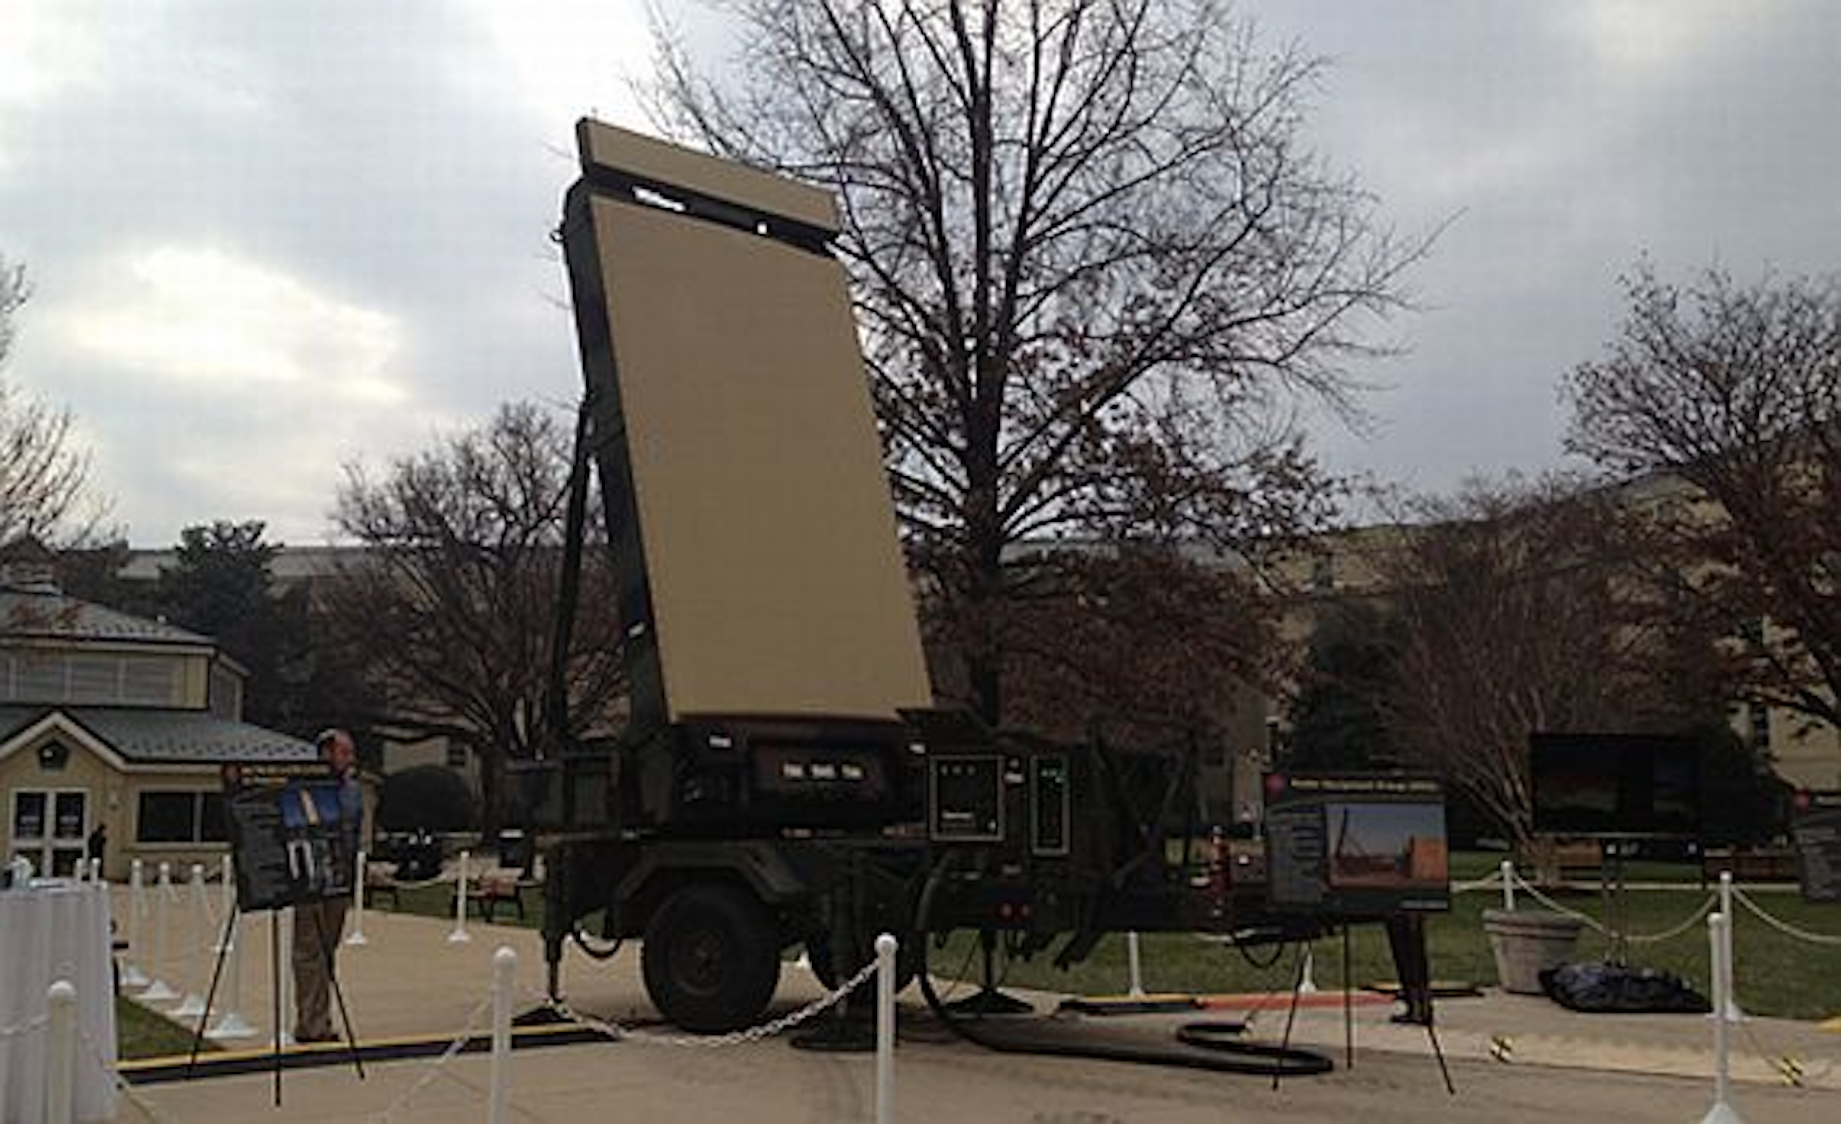 Latest order for Marine Corps G/ATOR radar systems brings total number